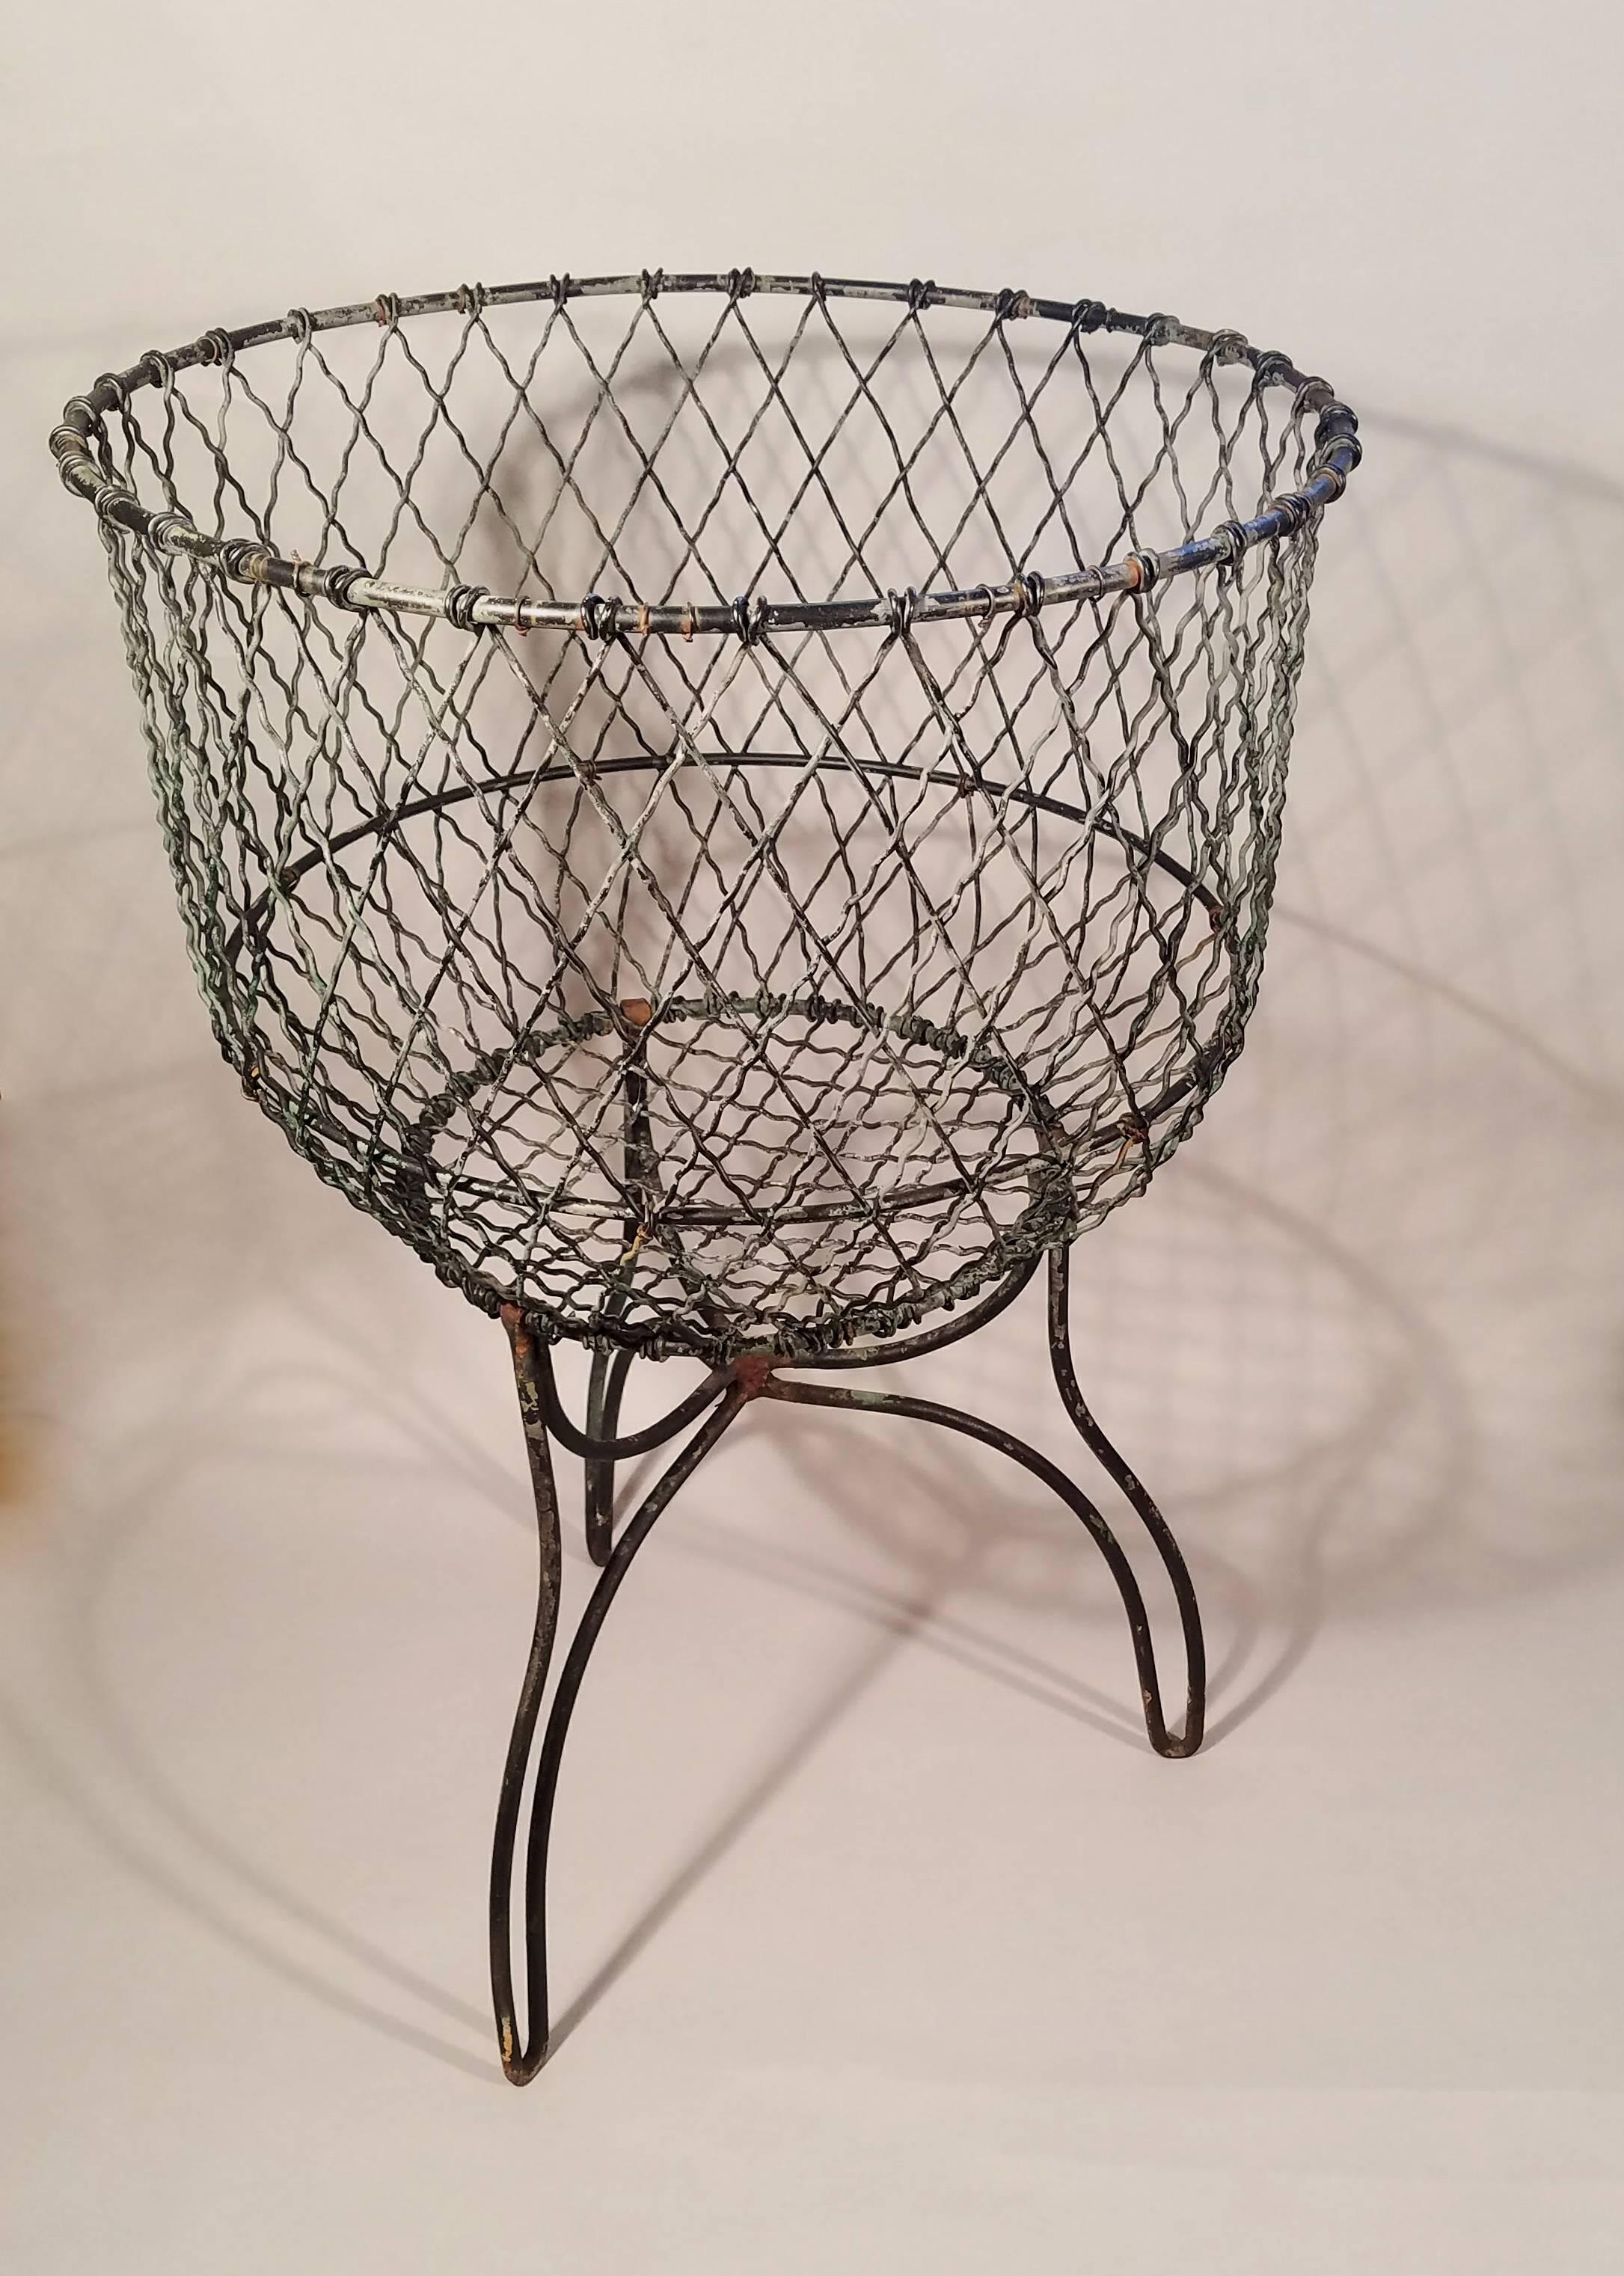 Pair of Antique American Victorian Wire Baskets, Late 19th-Early 20th Century 1